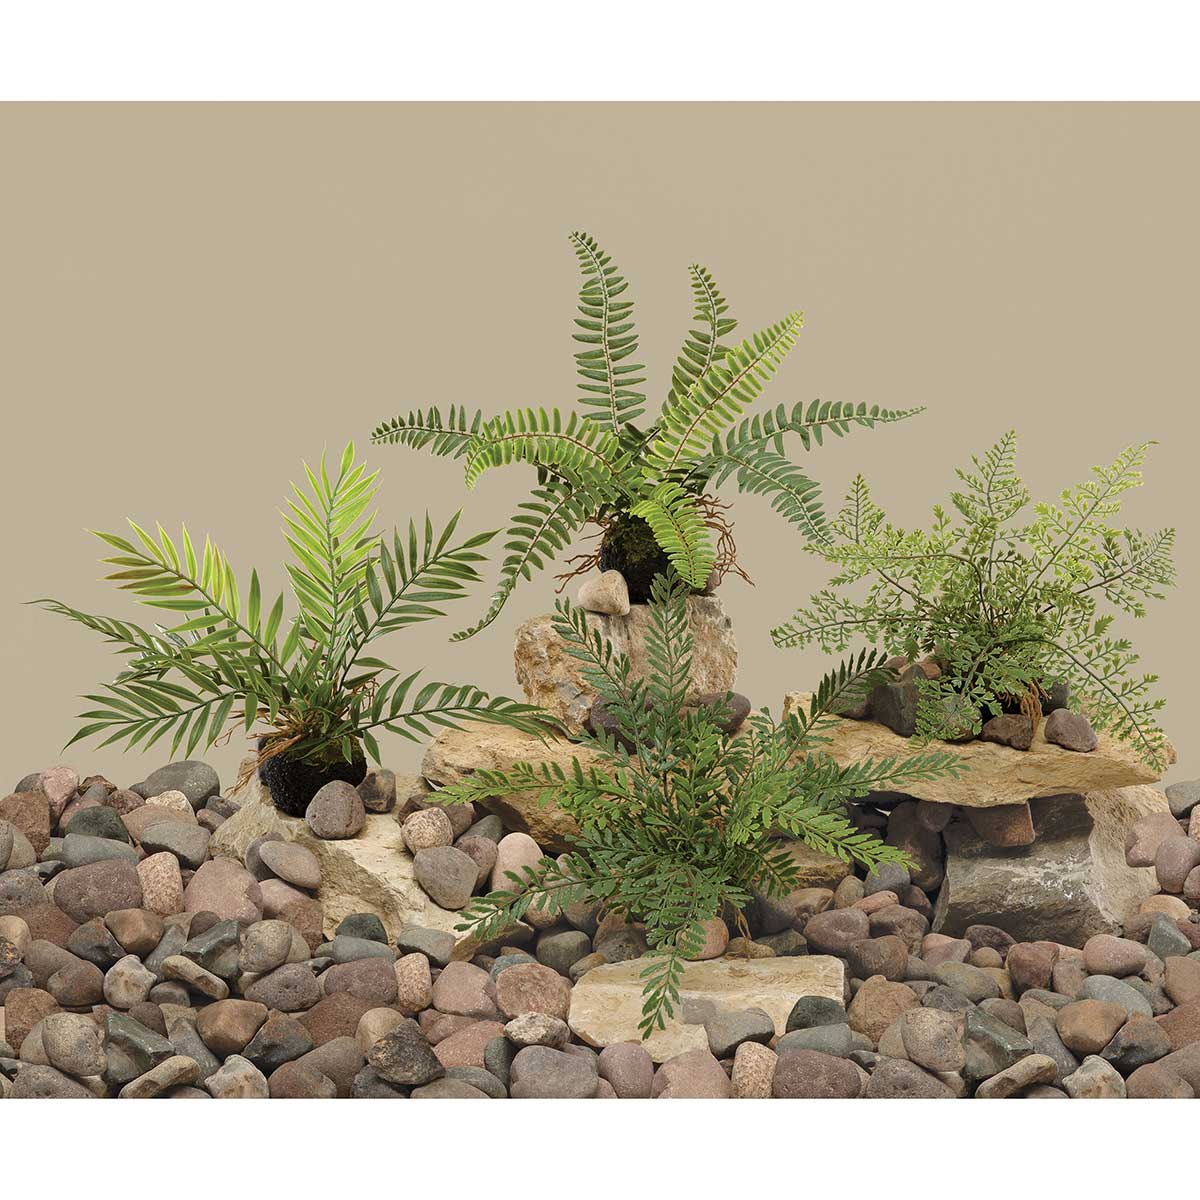 FERN MAIDENHAIR ON DIRT WITH ROOT 15IN X 10IN GREEN - Click Image to Close